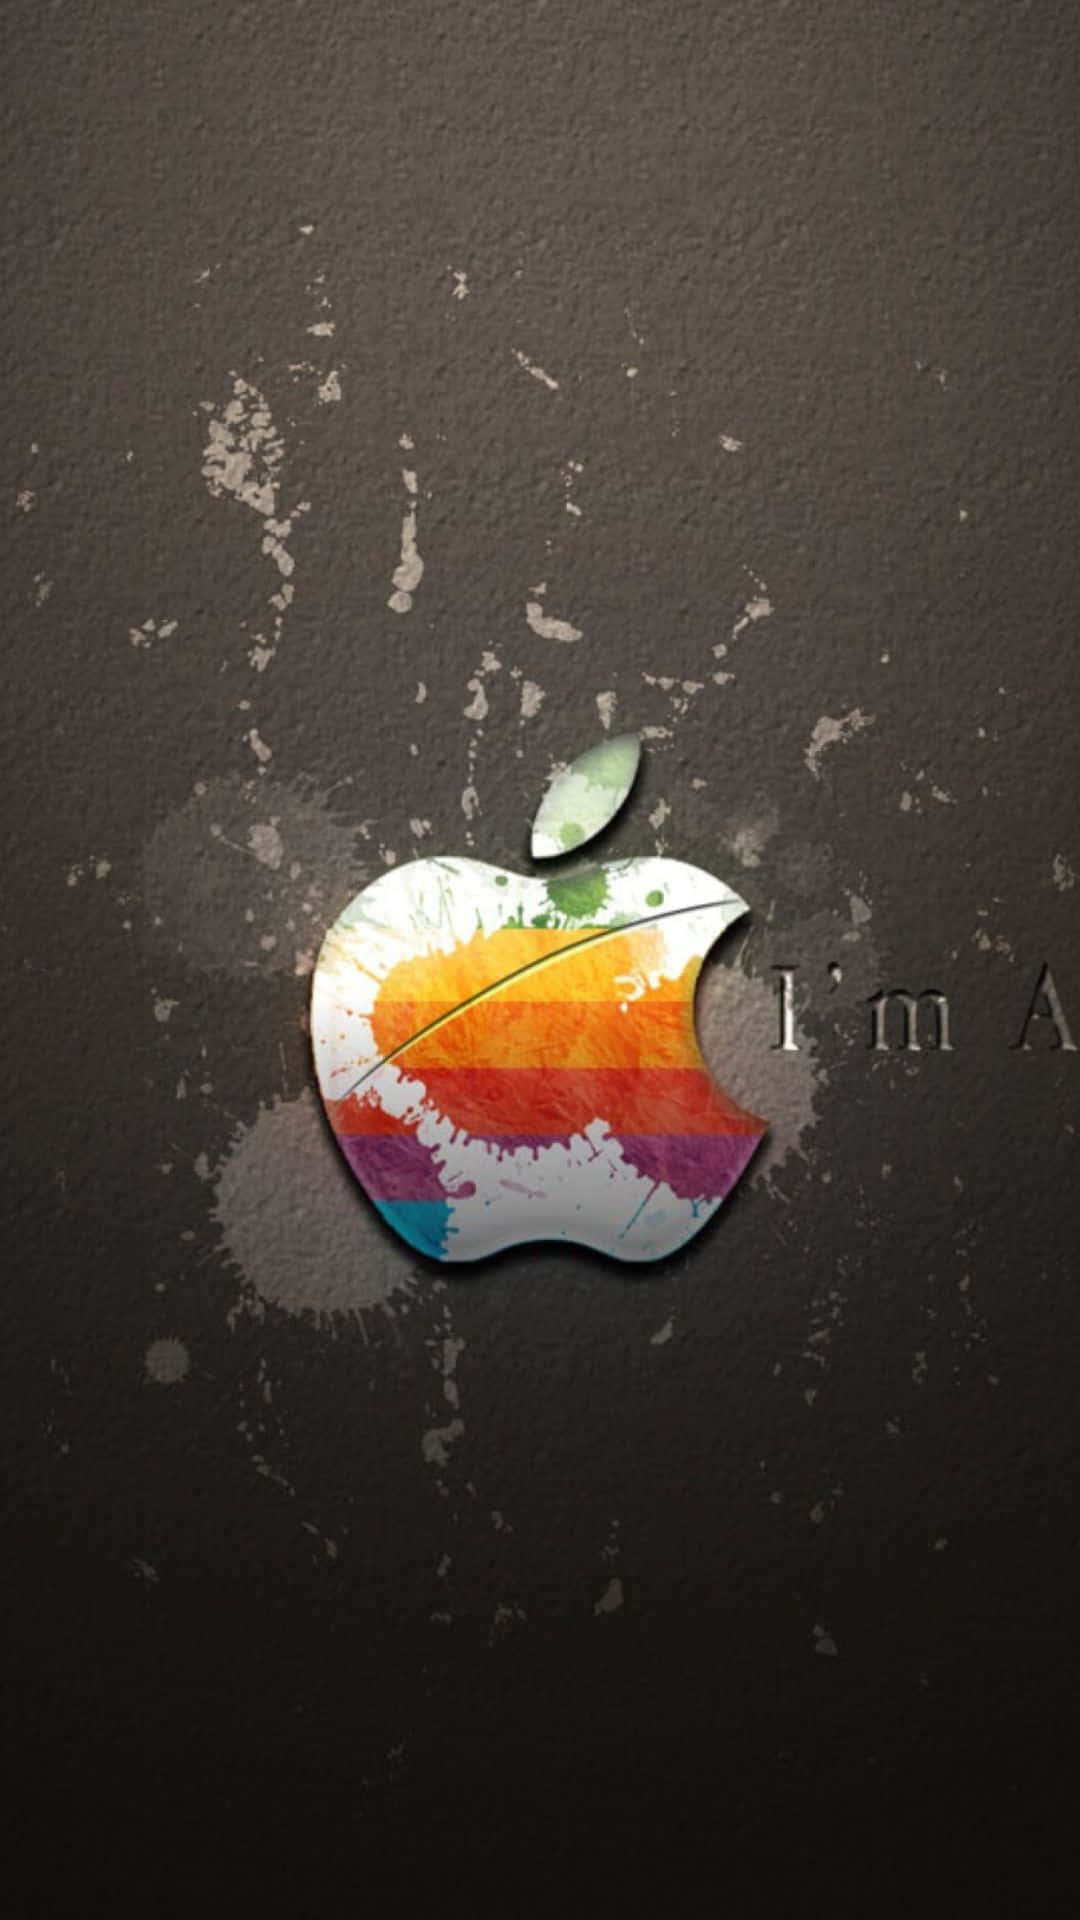 Apple Iphone X Insignia Water Splatters Background